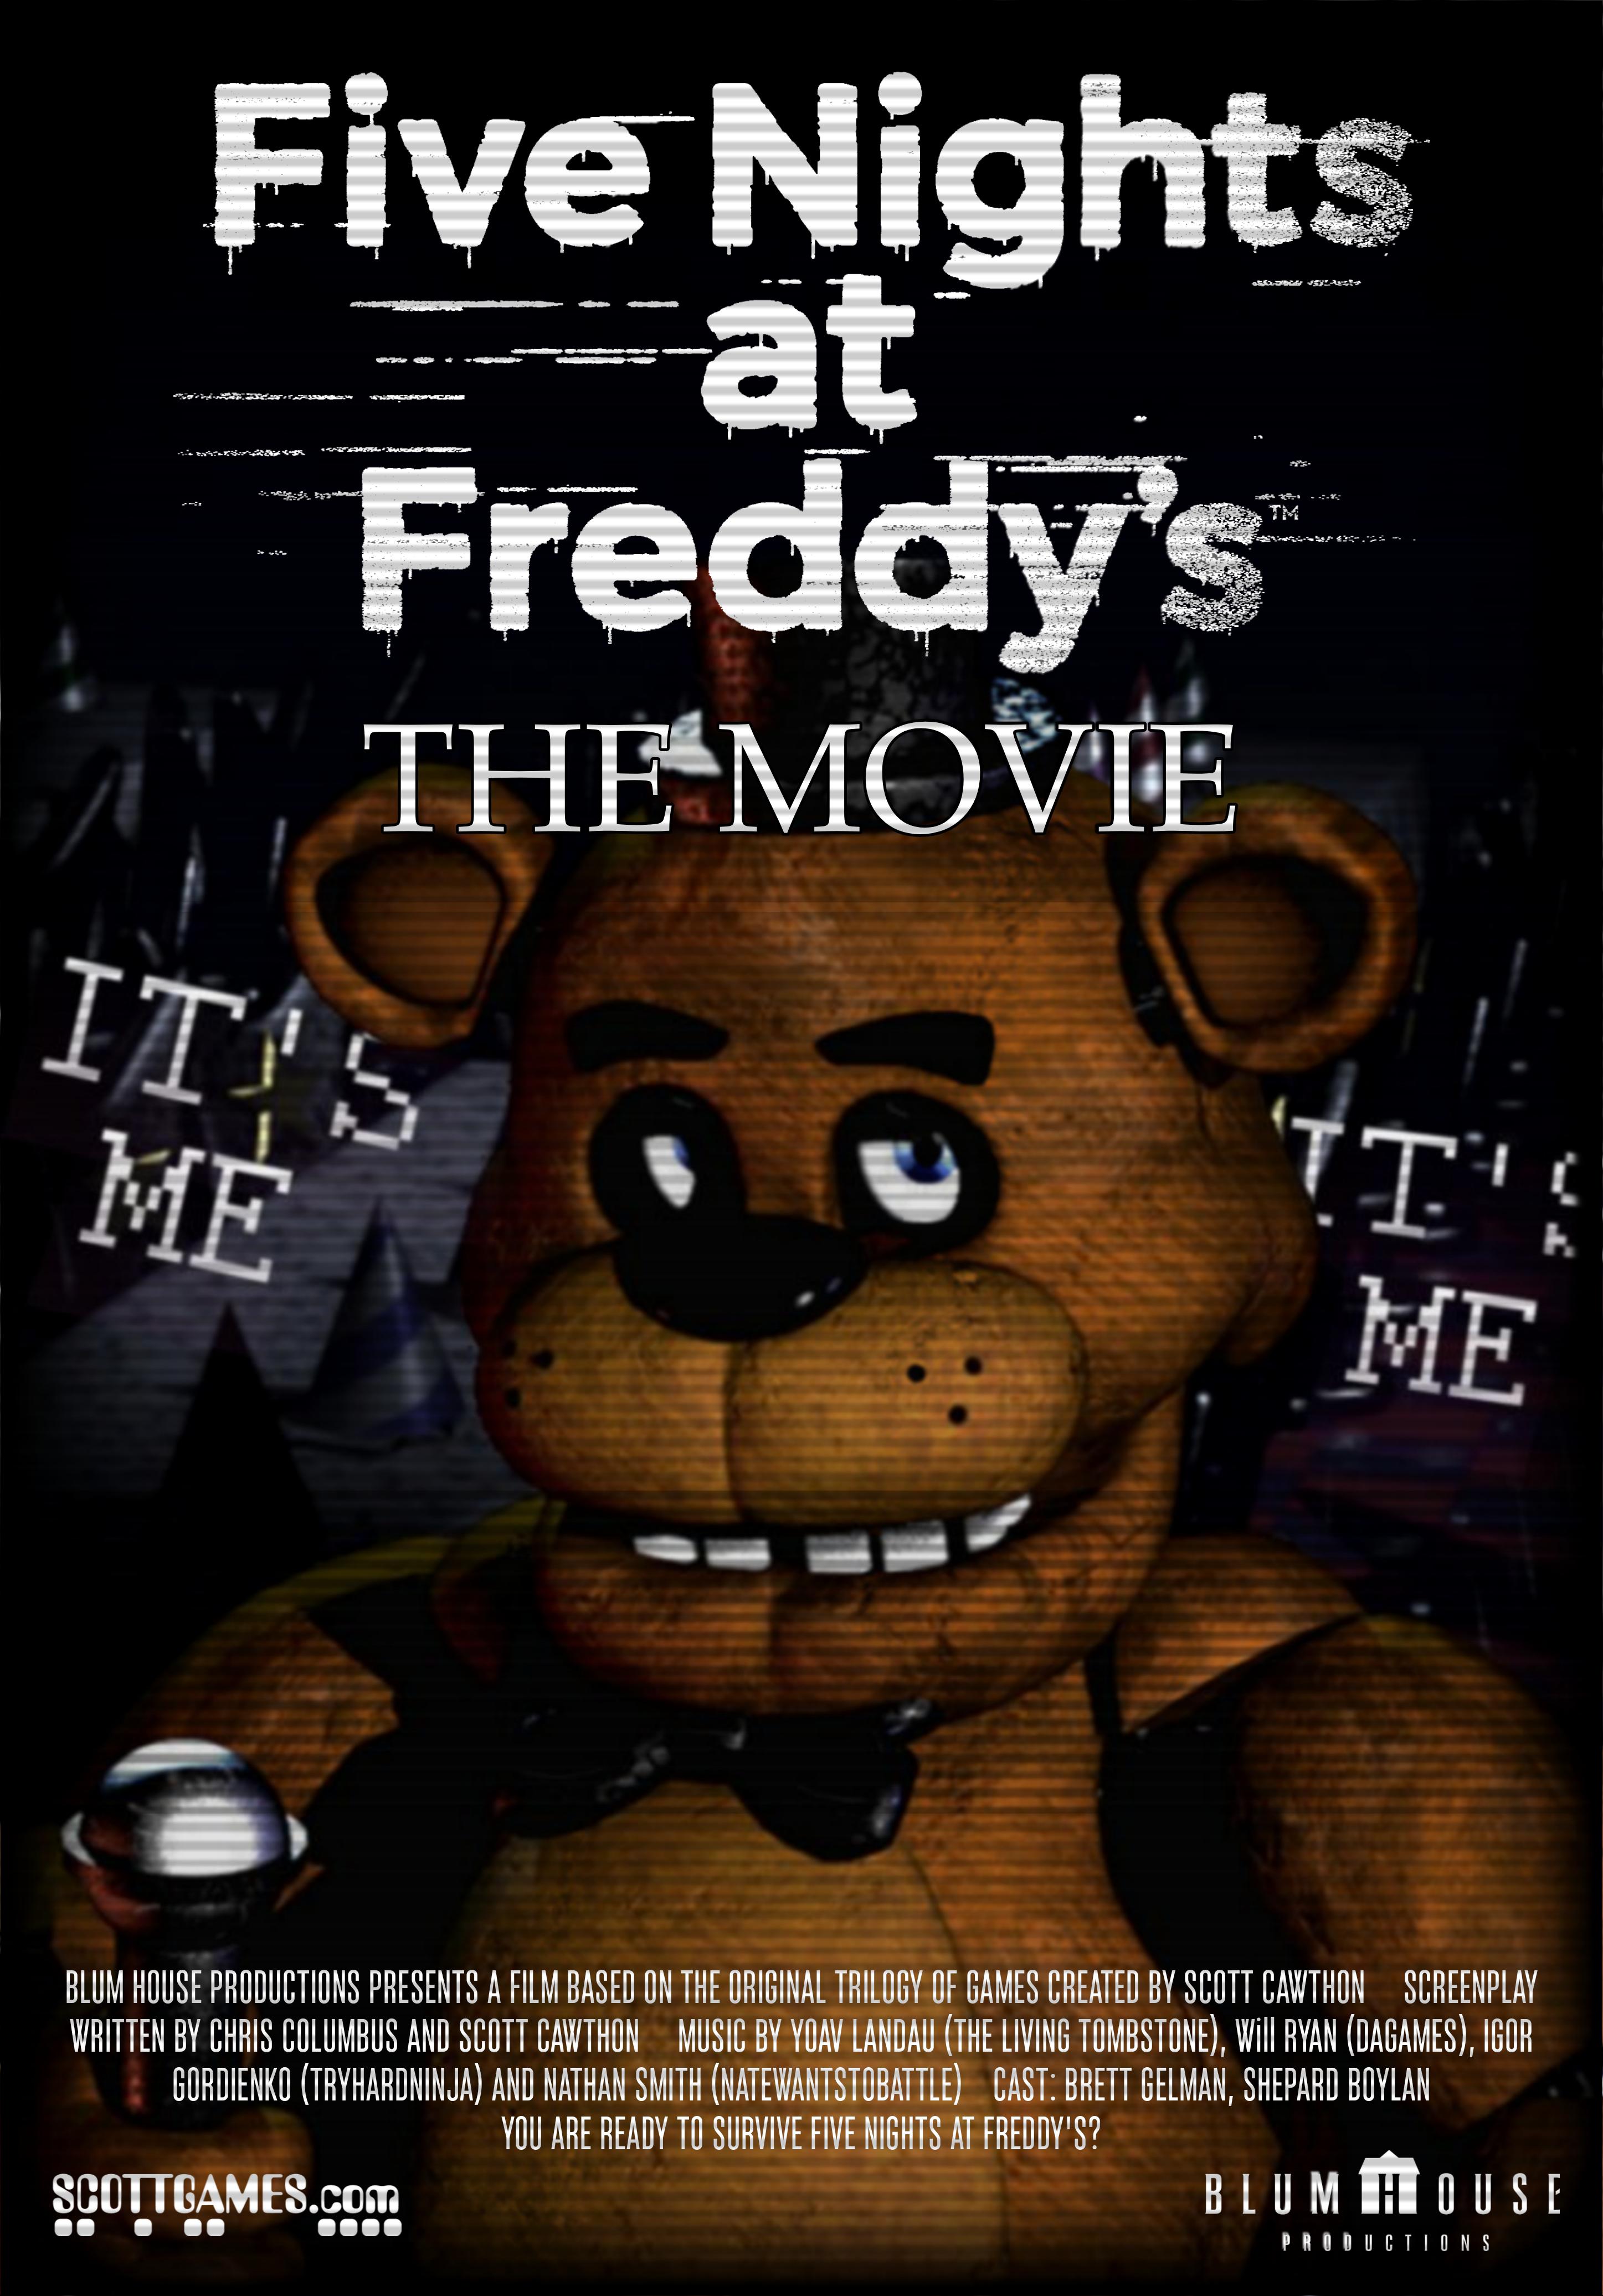 Five Nights at Freddy's The Movie (Poster) (Fan Made). This seventh anniversary of Five Nights at Freddy's I made and edited a poster of the future movie. I hope you like it